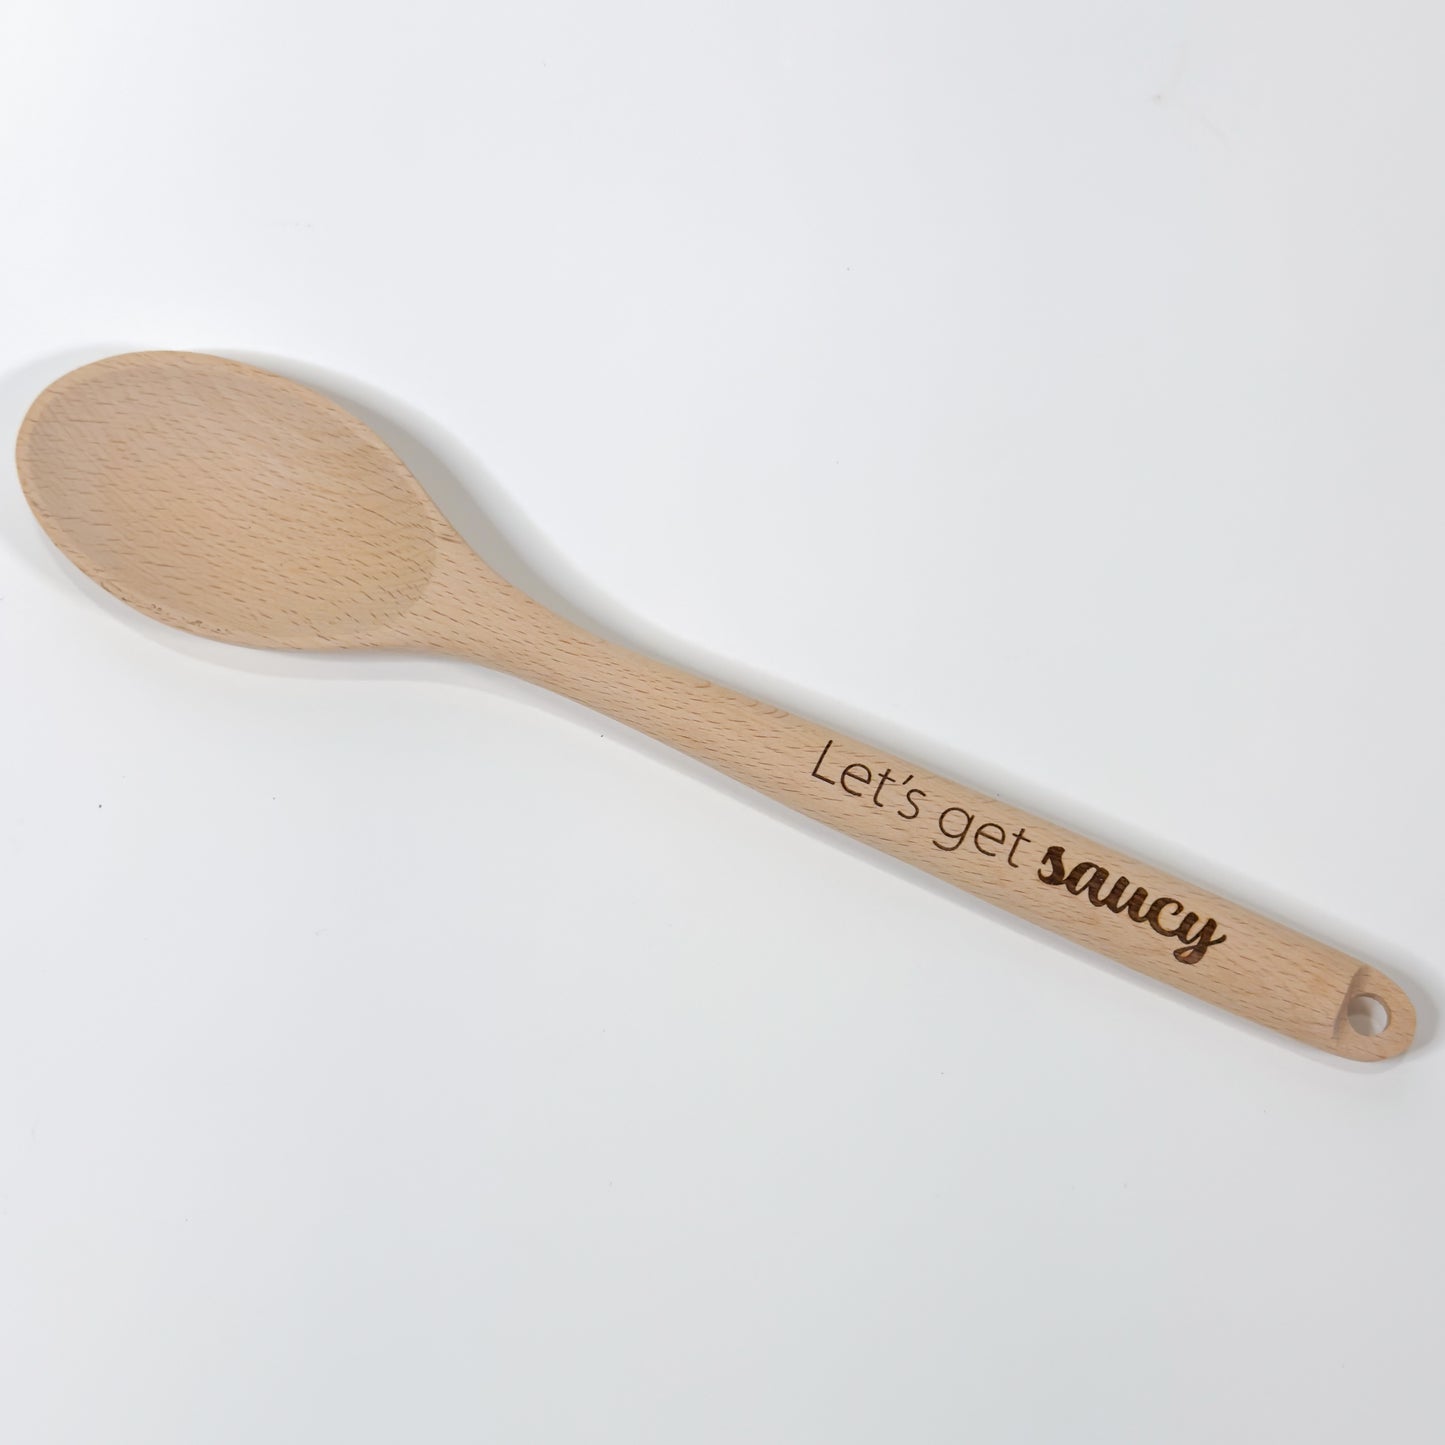 Engraved Wood Spoon, “Let's get saucy”